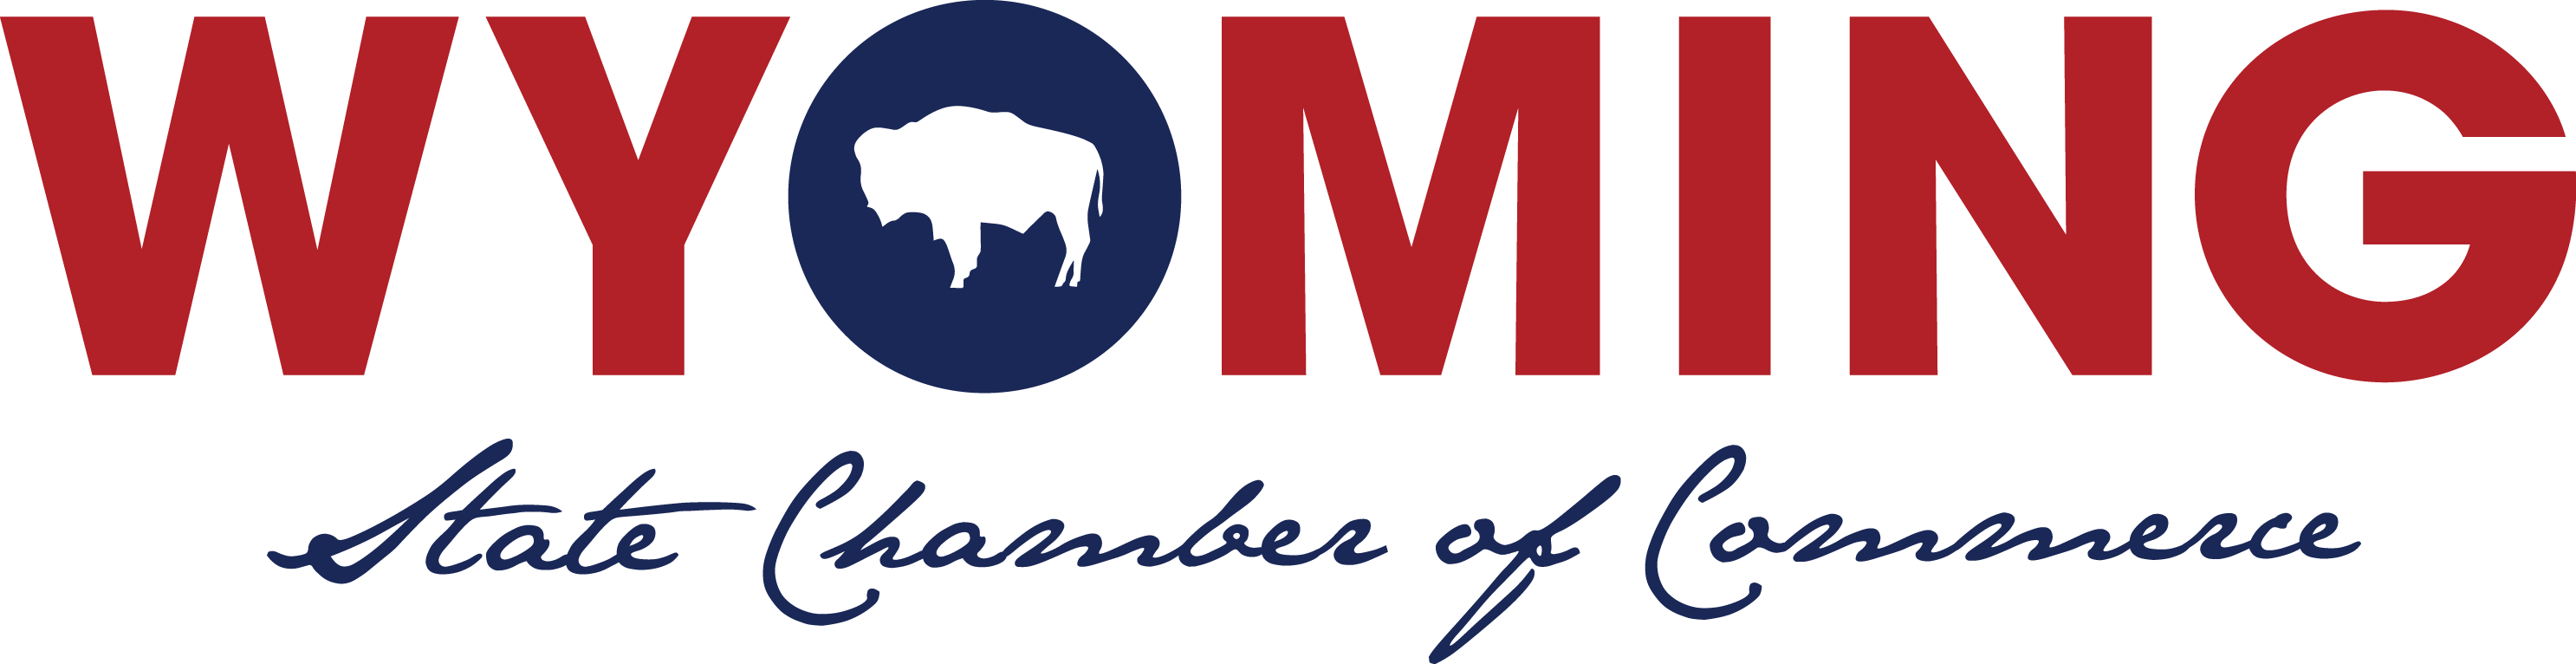 Wyoming State Chamber of Commerce's Image